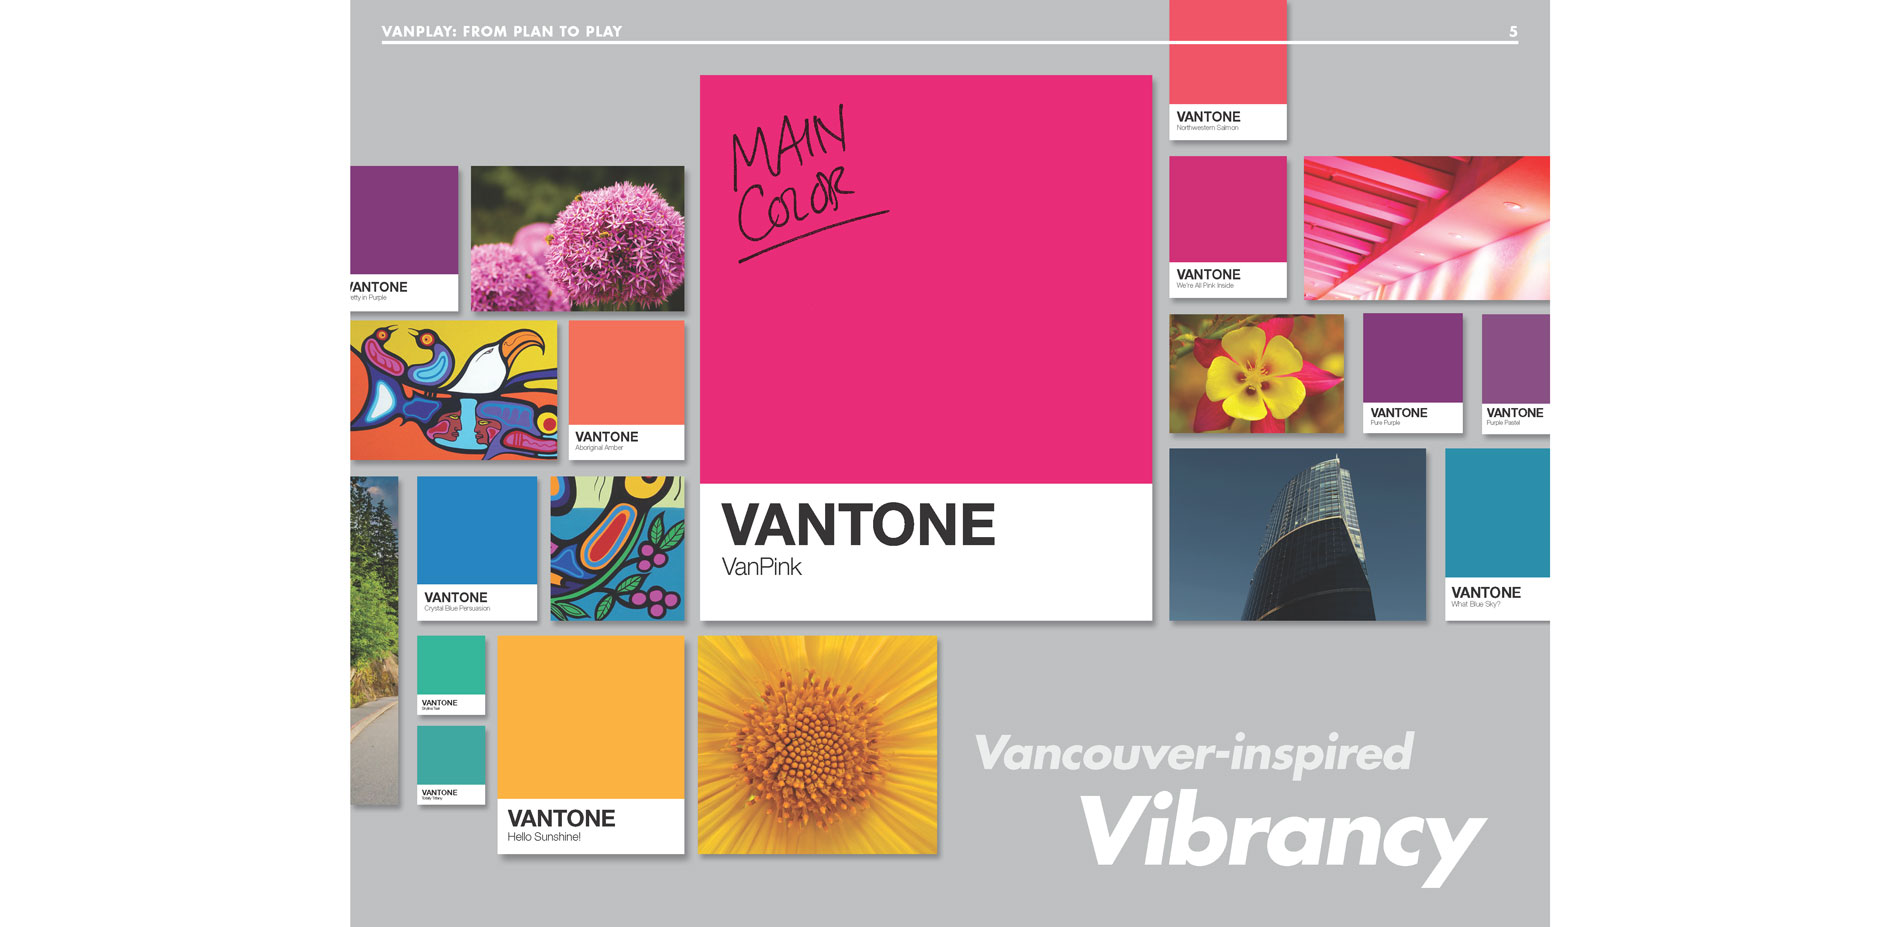 The team sought inspiration in the vibrant nature of Vancouver, visually and culturally. Hundreds of photographs representing color and culture were c…